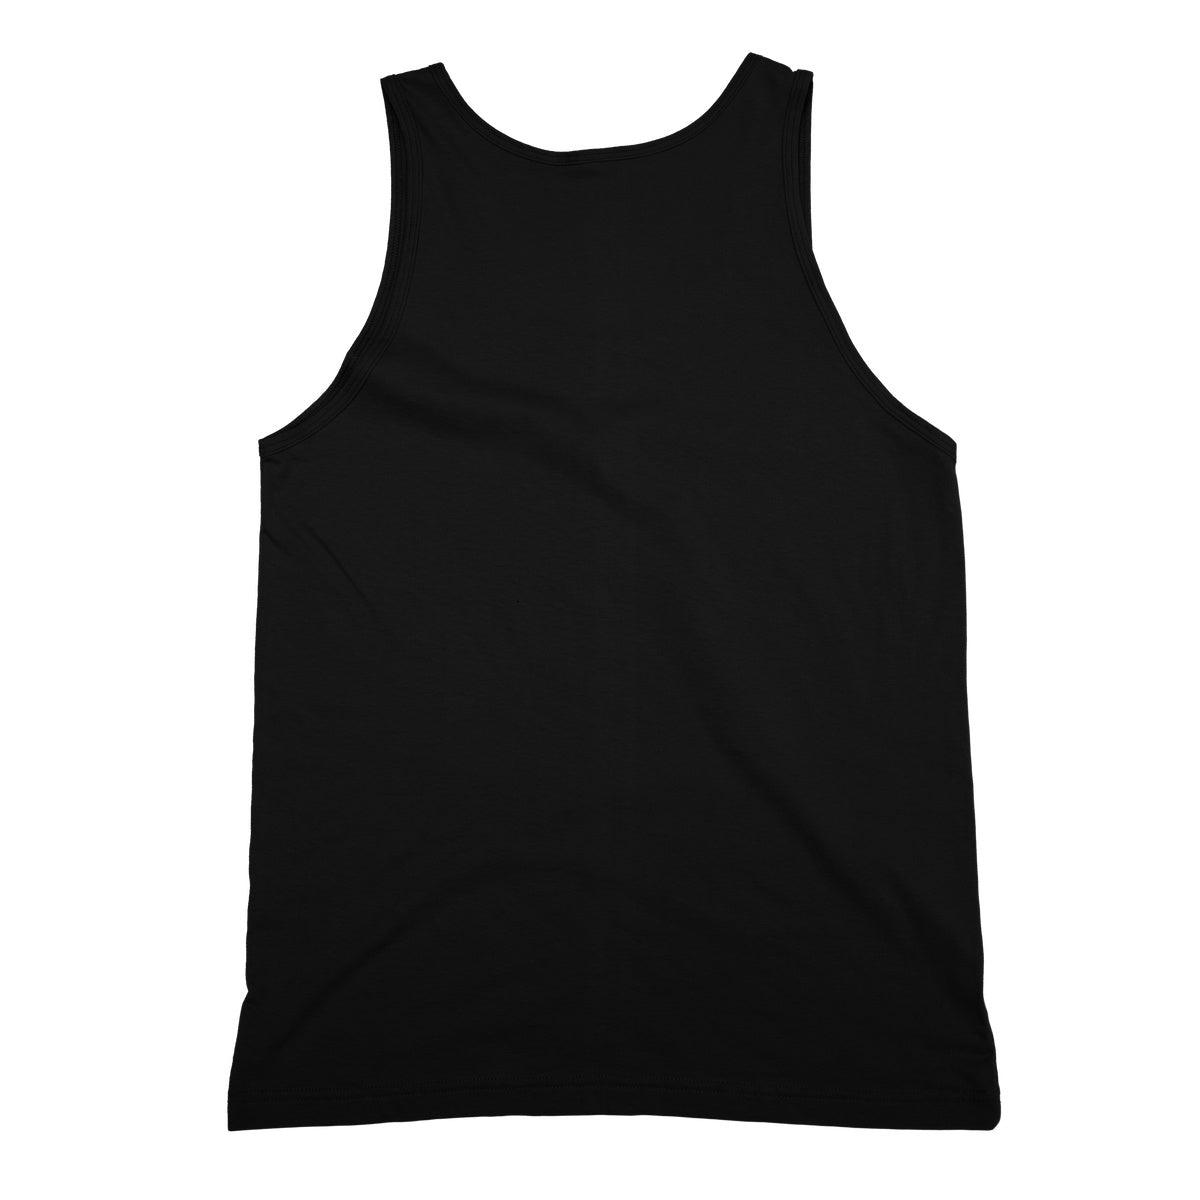 Yuh 2 Rude Softstyle Tank Top - D'Sare 